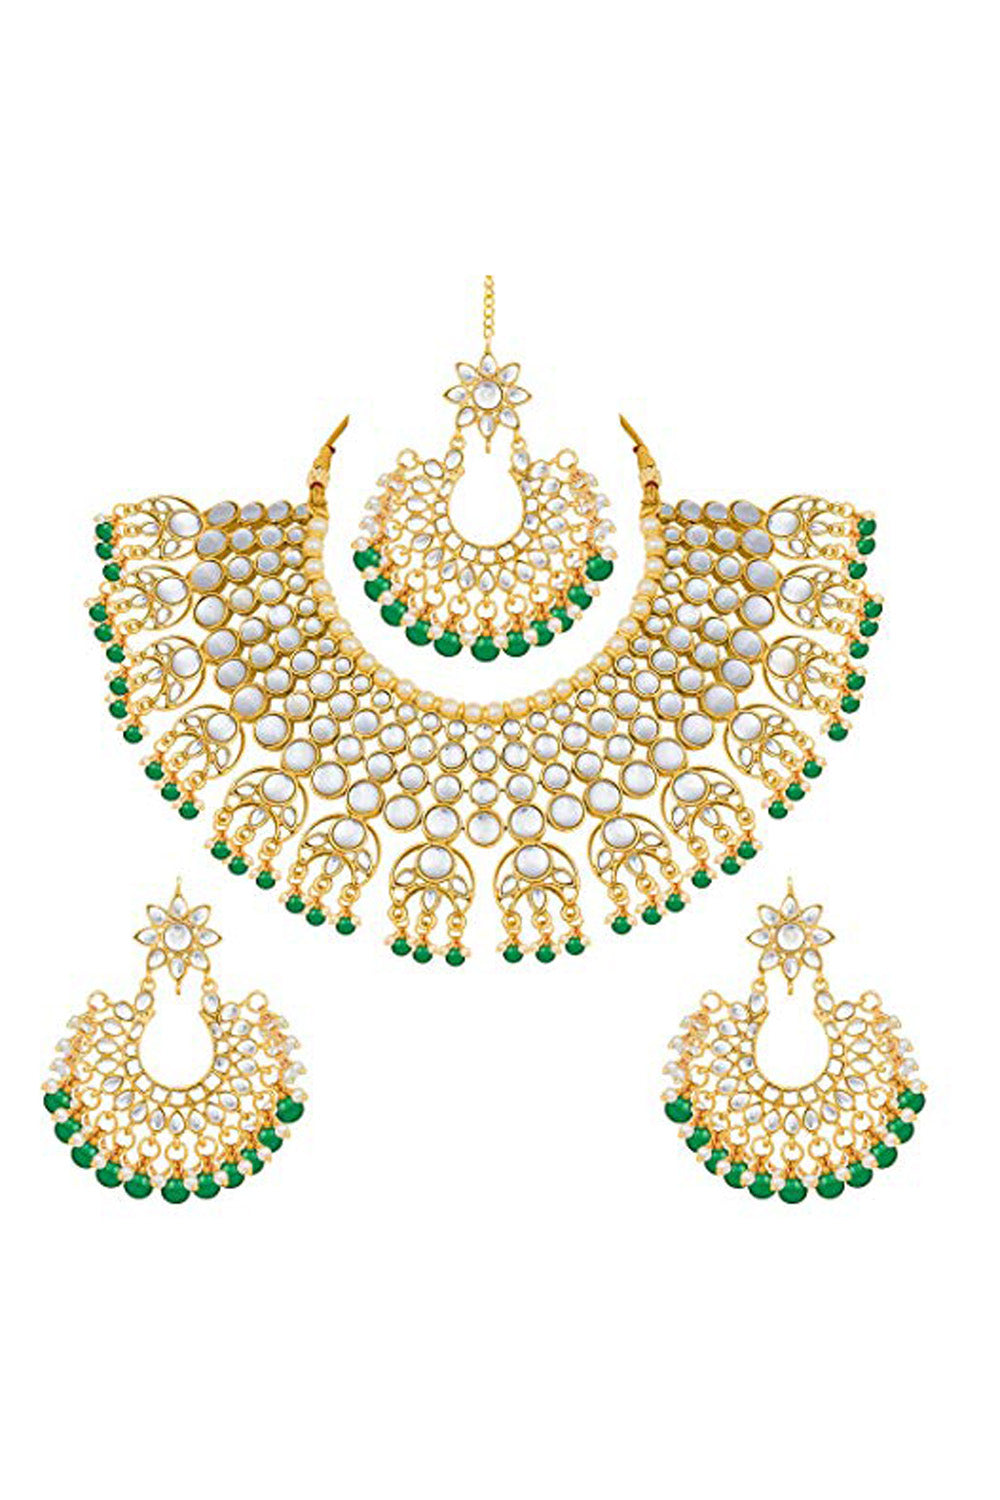 Alloy Necklace with Earrings and Maang Tikka in green